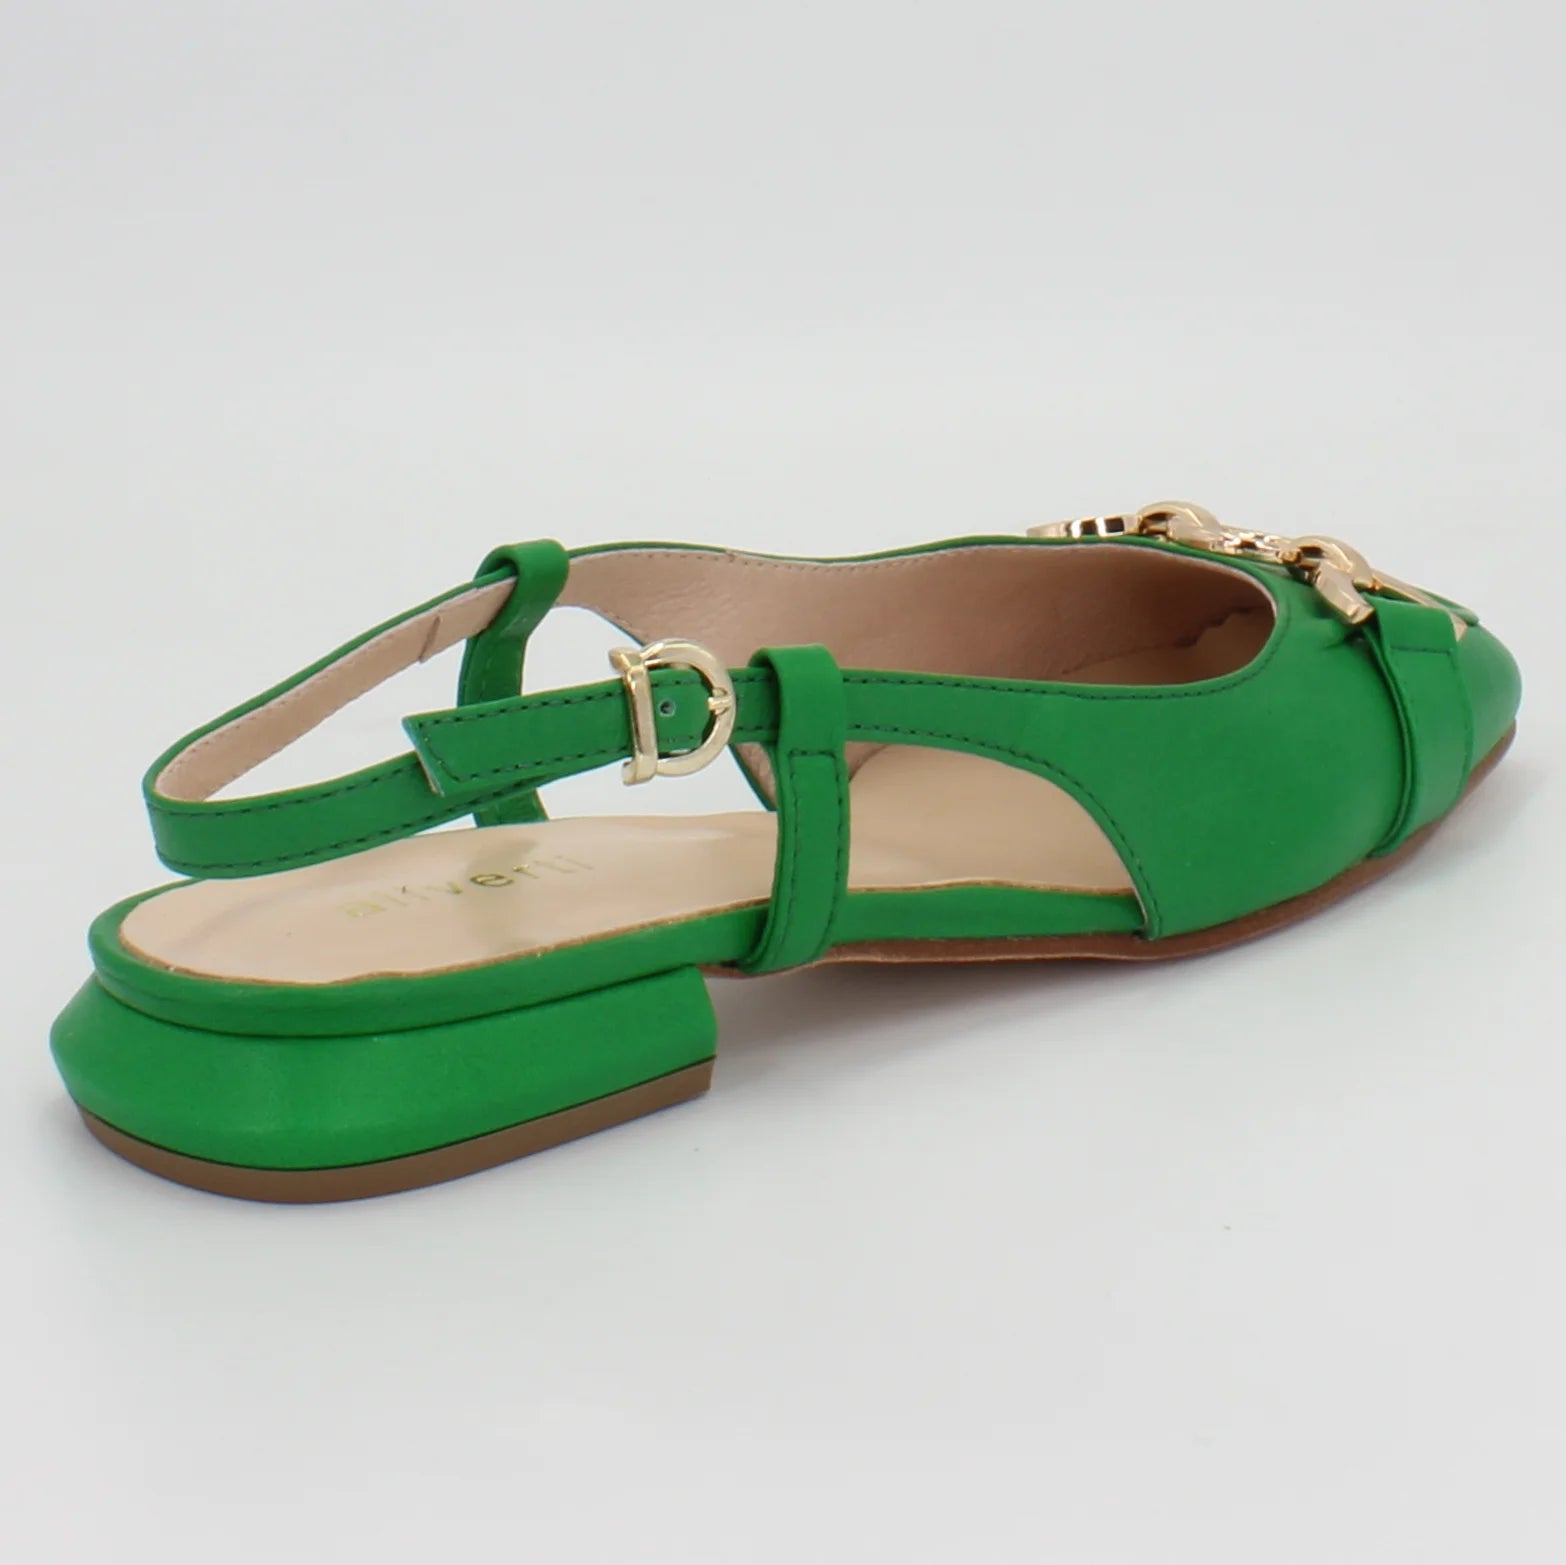 Shop Handmade Italian Leather sling-back moccasin in emeraldo green (P255) or browse our range of hand-made Italian shoes in leather or suede in-store at Aliverti Cape Town, or shop online. We deliver in South Africa & offer multiple payment plans as well as accept multiple safe & secure payment methods.